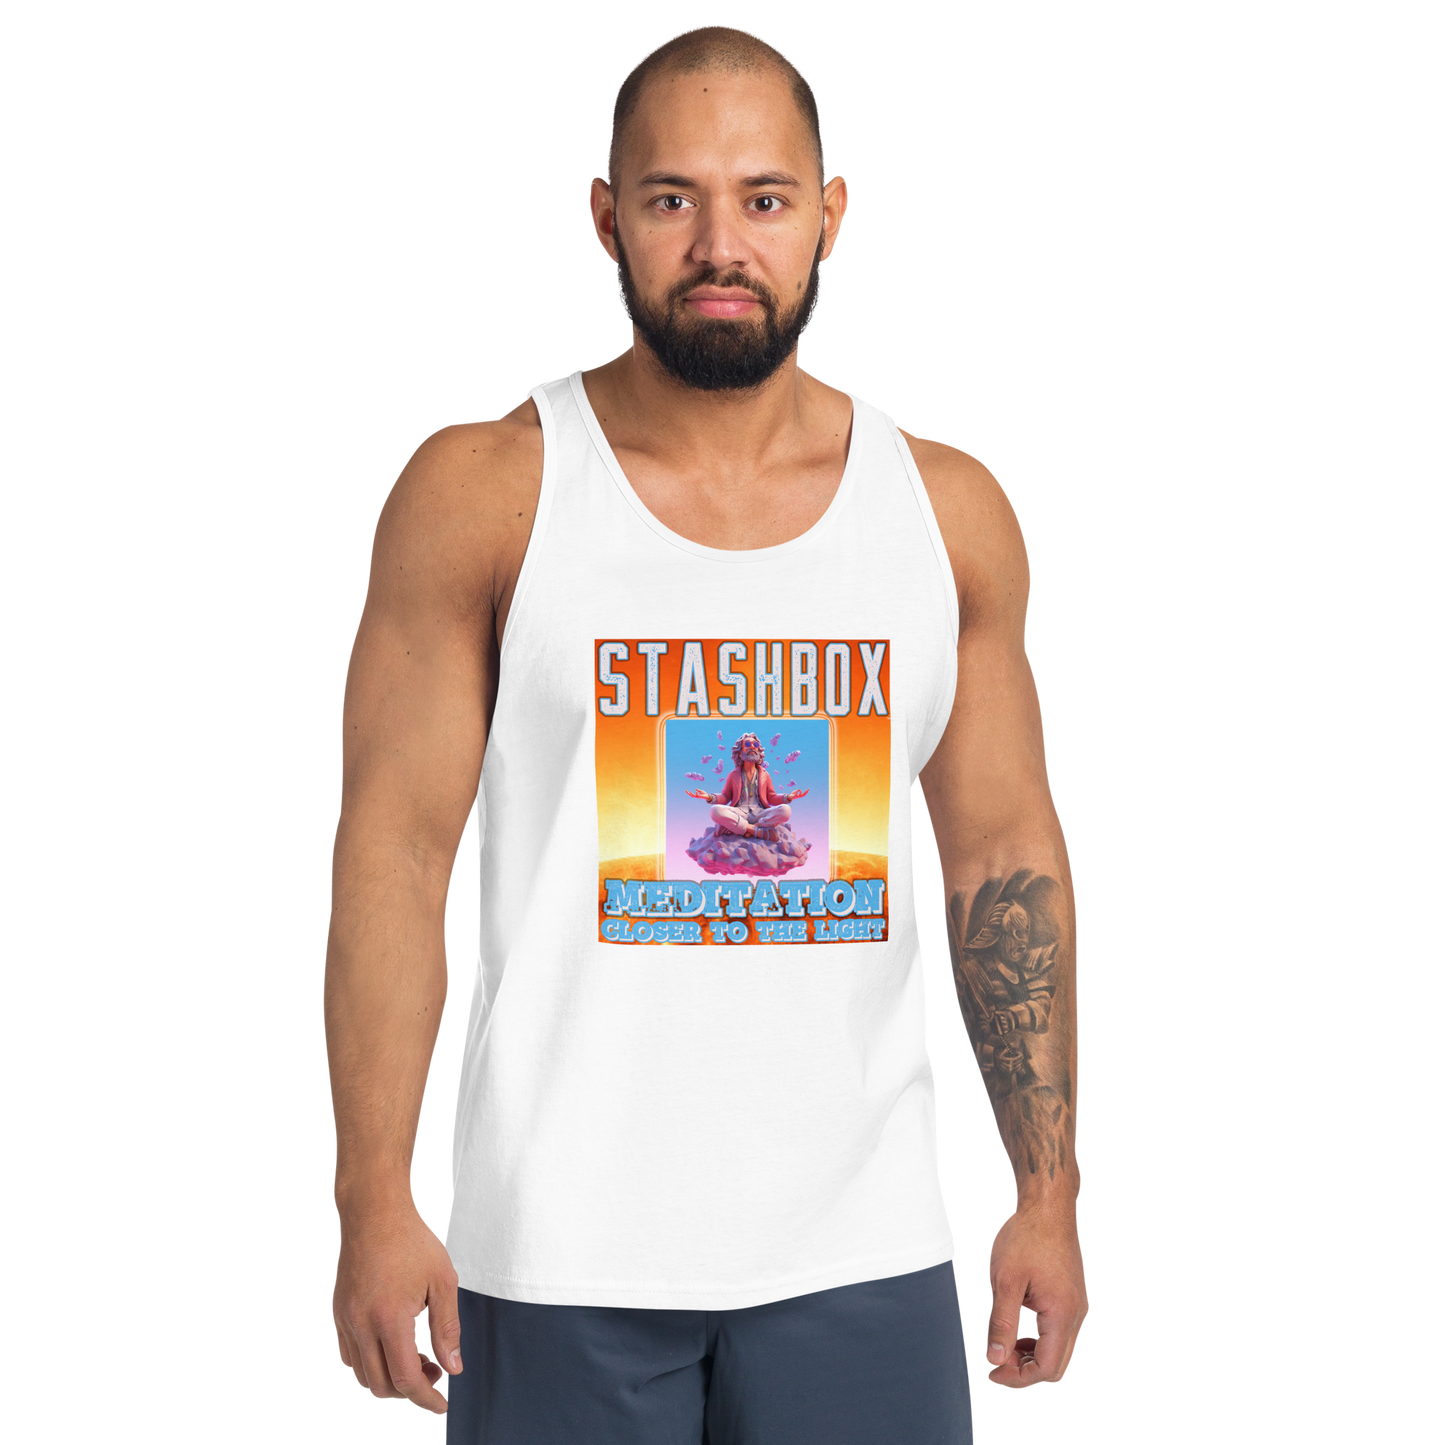 Immerse yourself in calmness with our Artwork #003 Meditation: Closer To the Light Men's Tanktop Shirt. Your clothing, your embrace of inner stillness, exclusively at Stashbox.ai.